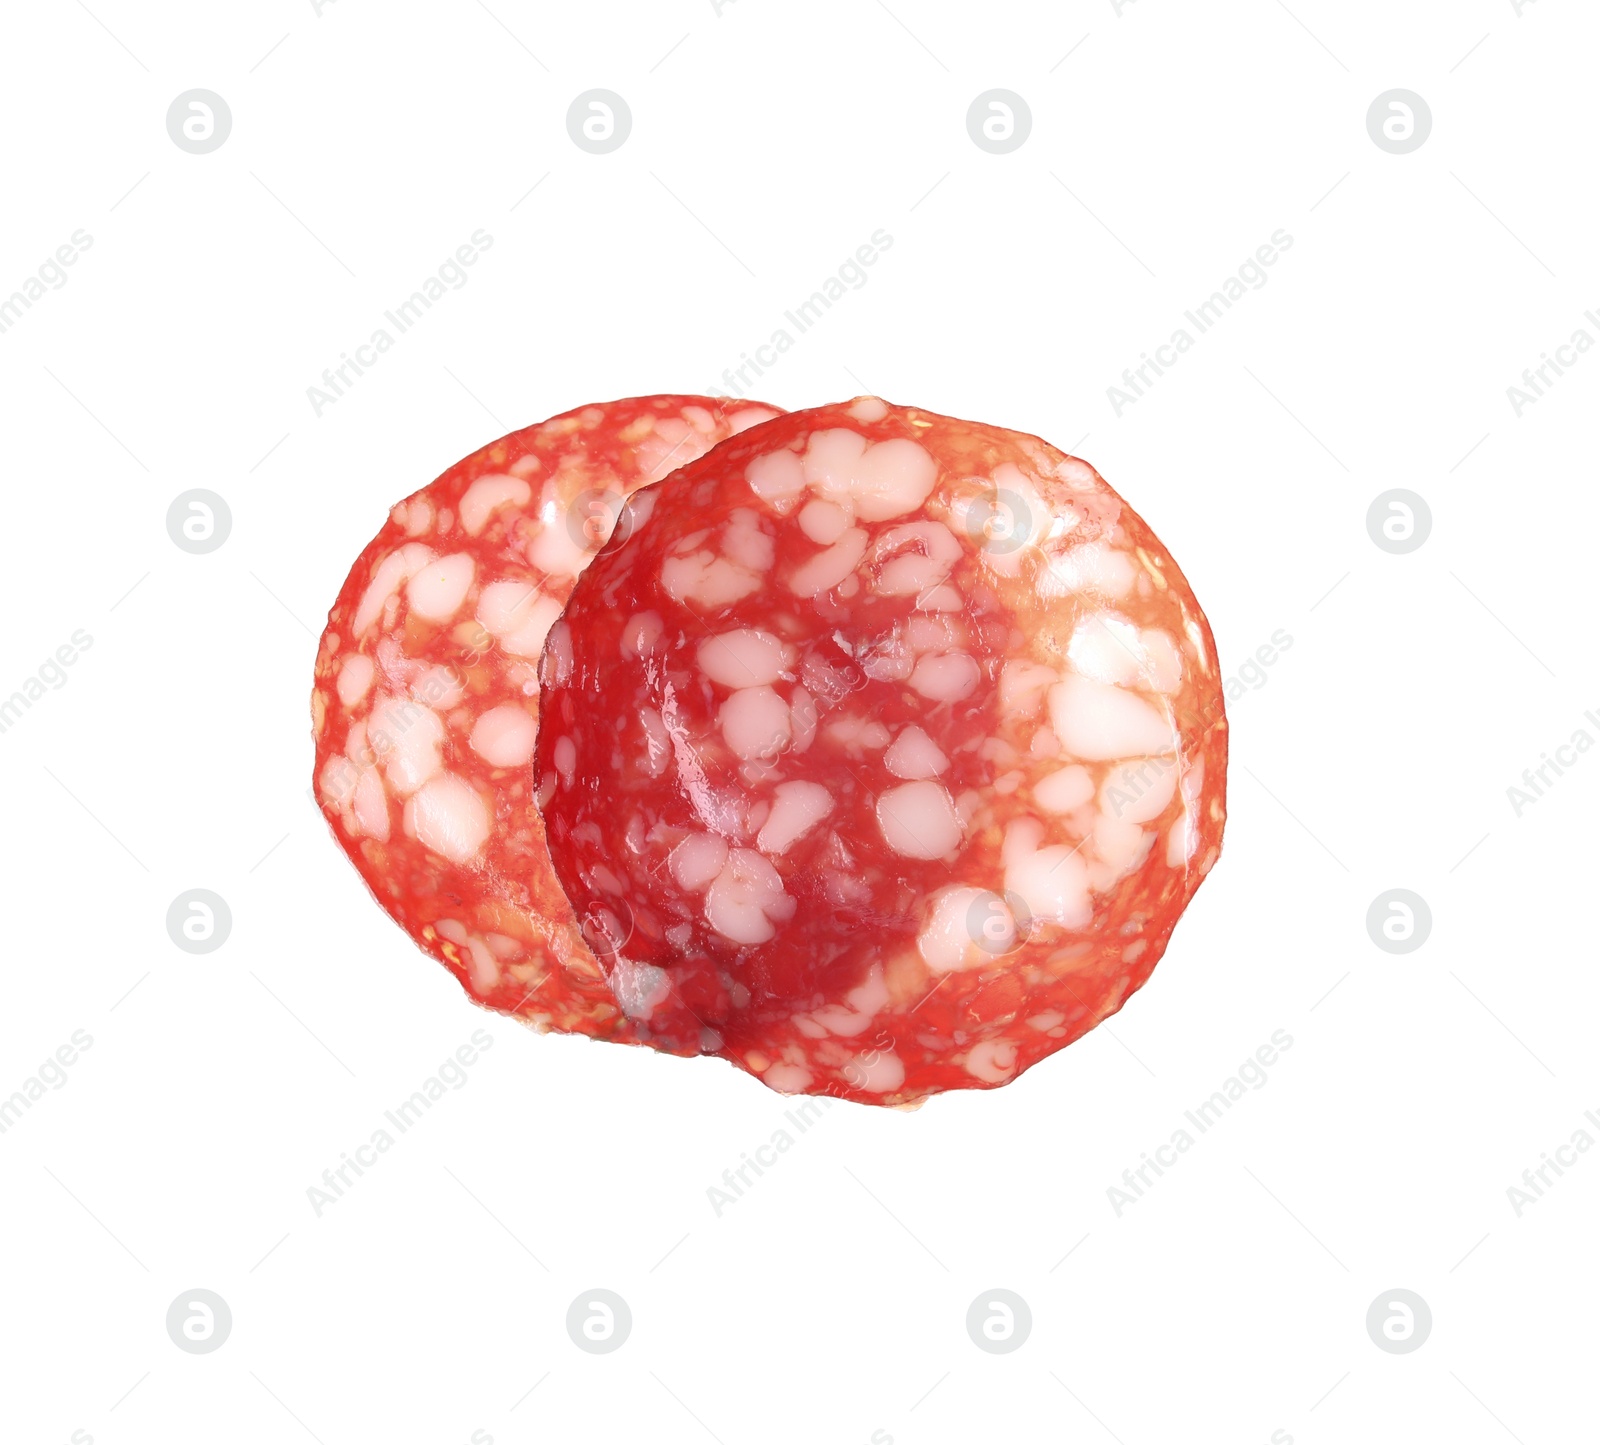 Photo of Slices of delicious smoked sausage isolated on white